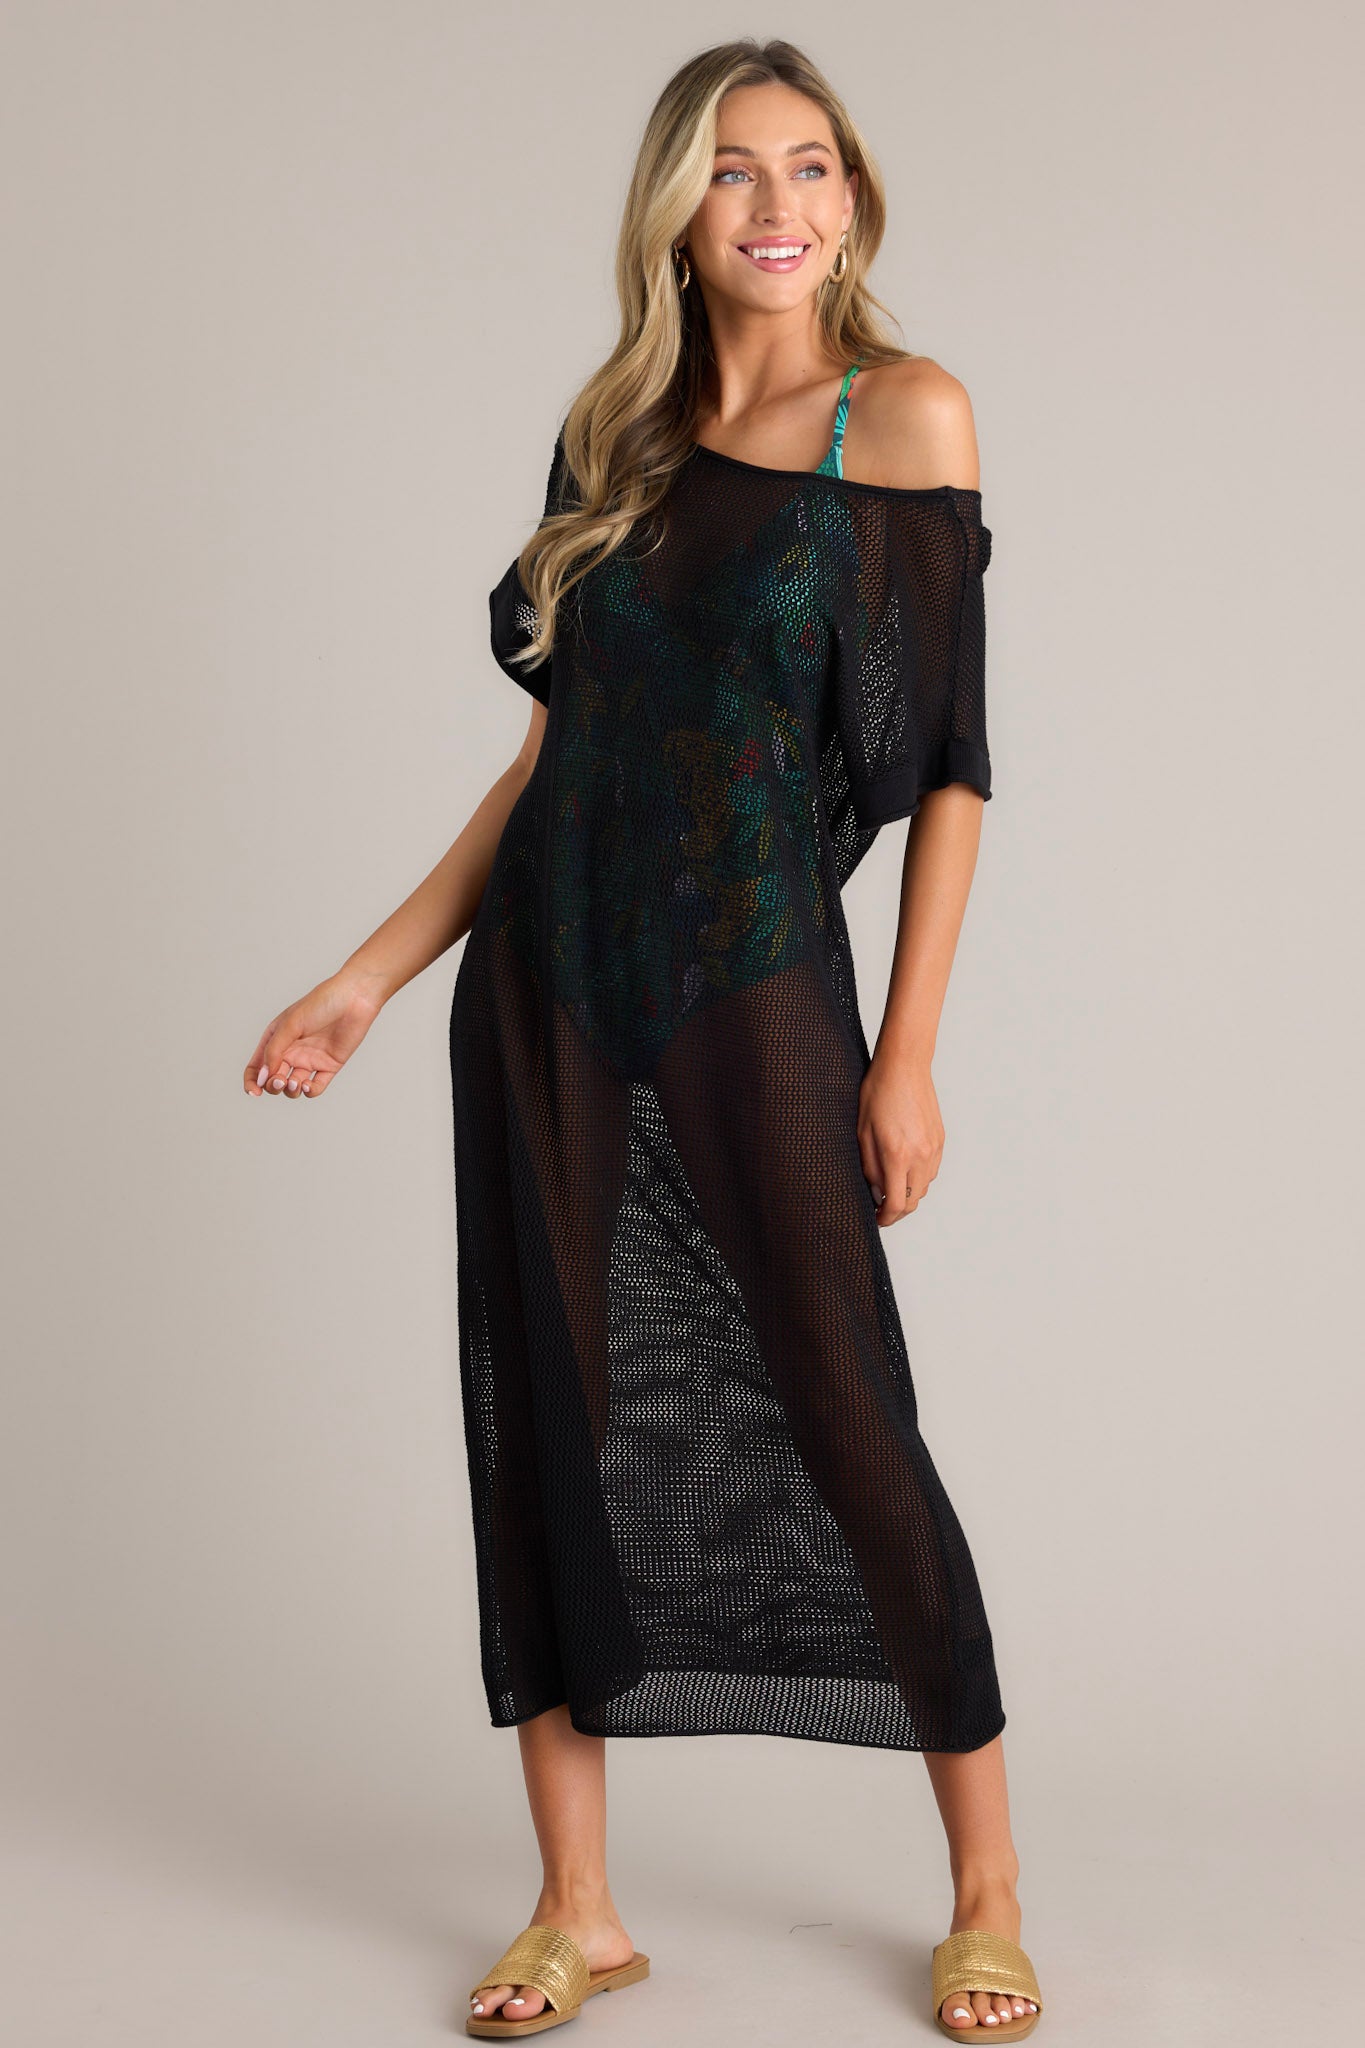 Front  view of this black cover-up dress that features a wide rounded neckline, open back feature, an open-knit design, and cuffed short sleeves.